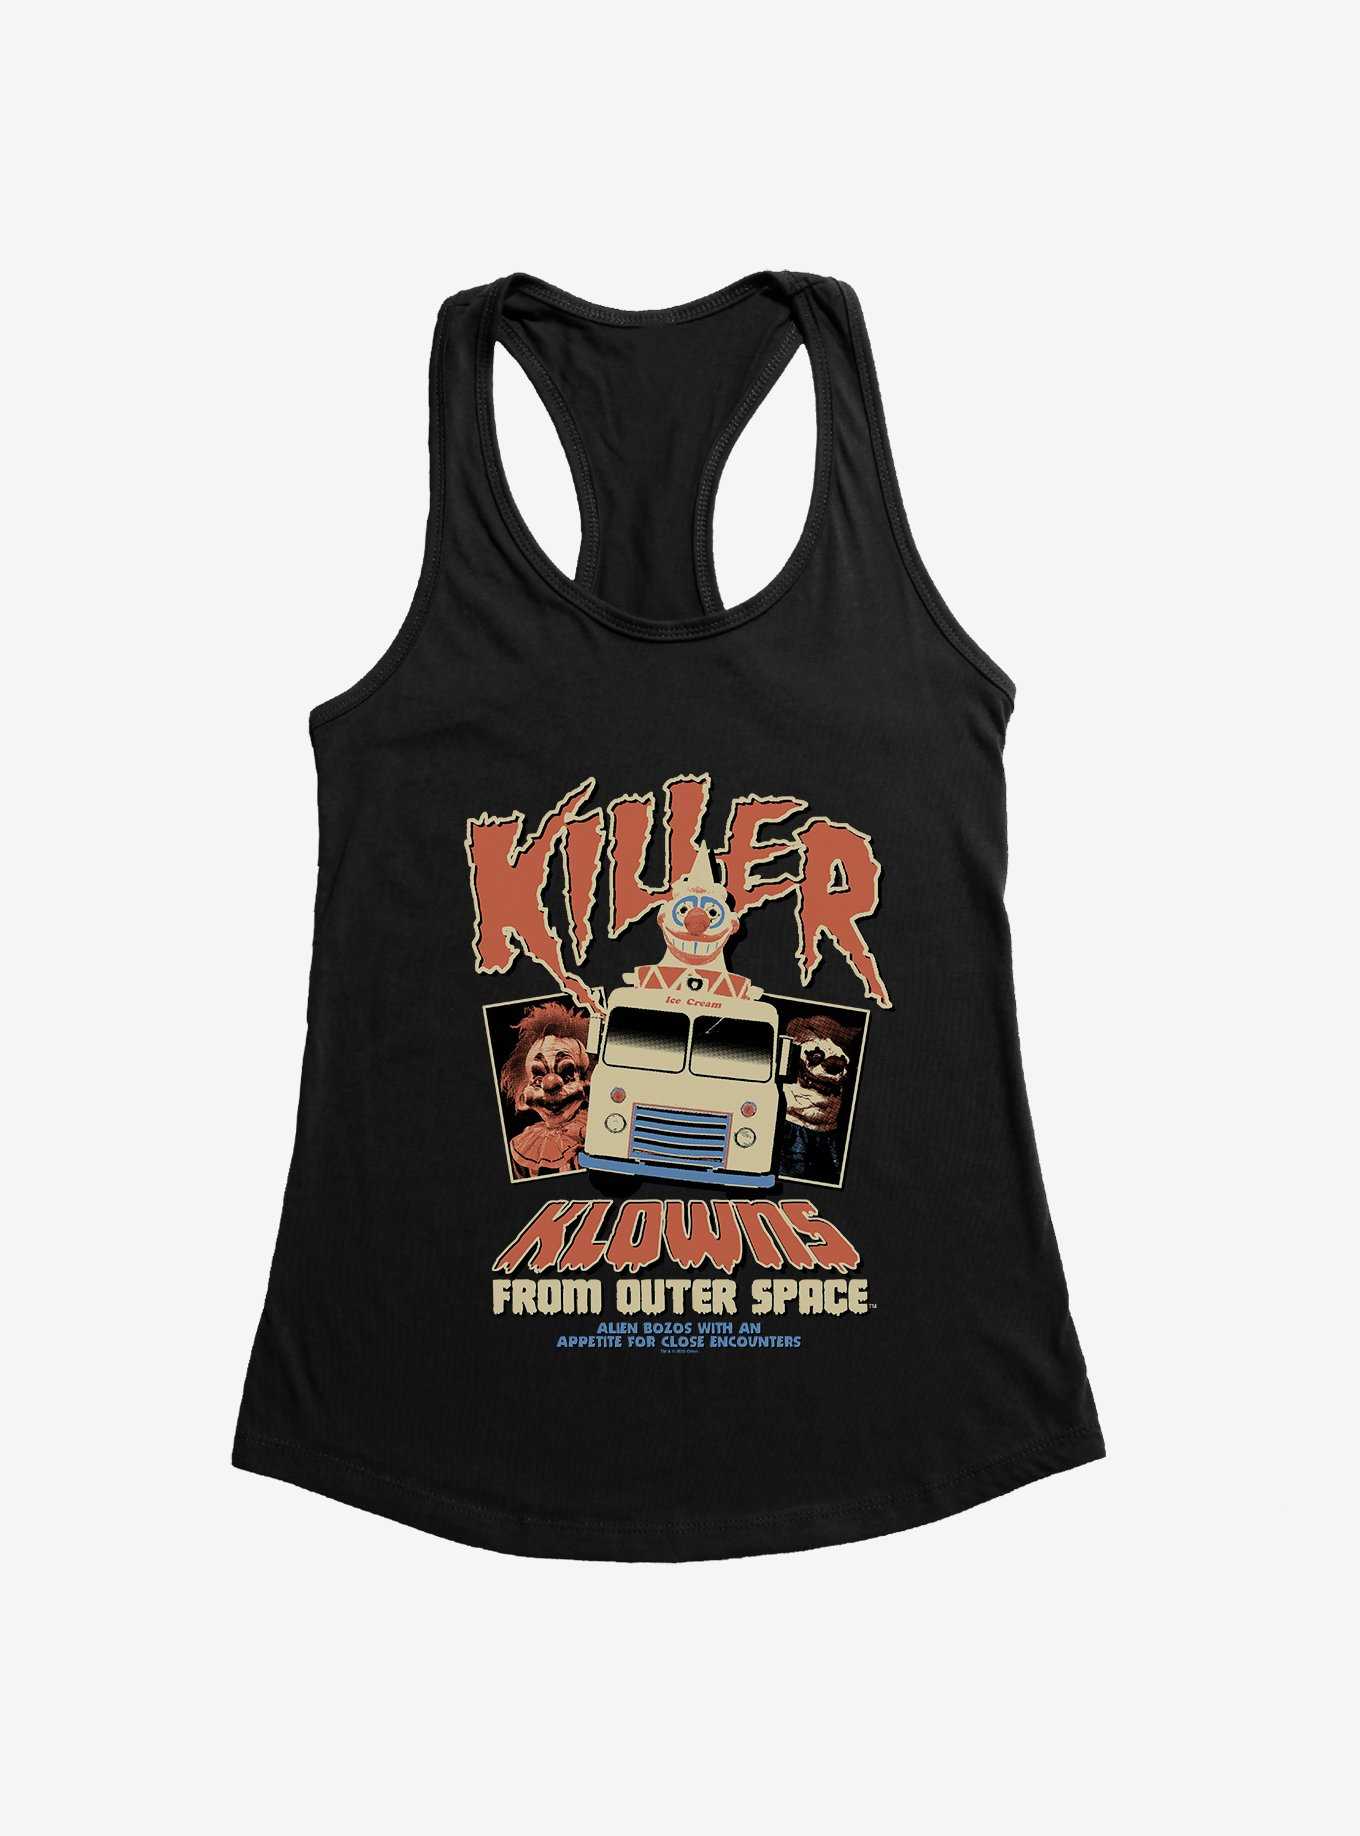 Killer Klowns From Outer Space Vintage Movie Poster Womens Tank Top, , hi-res